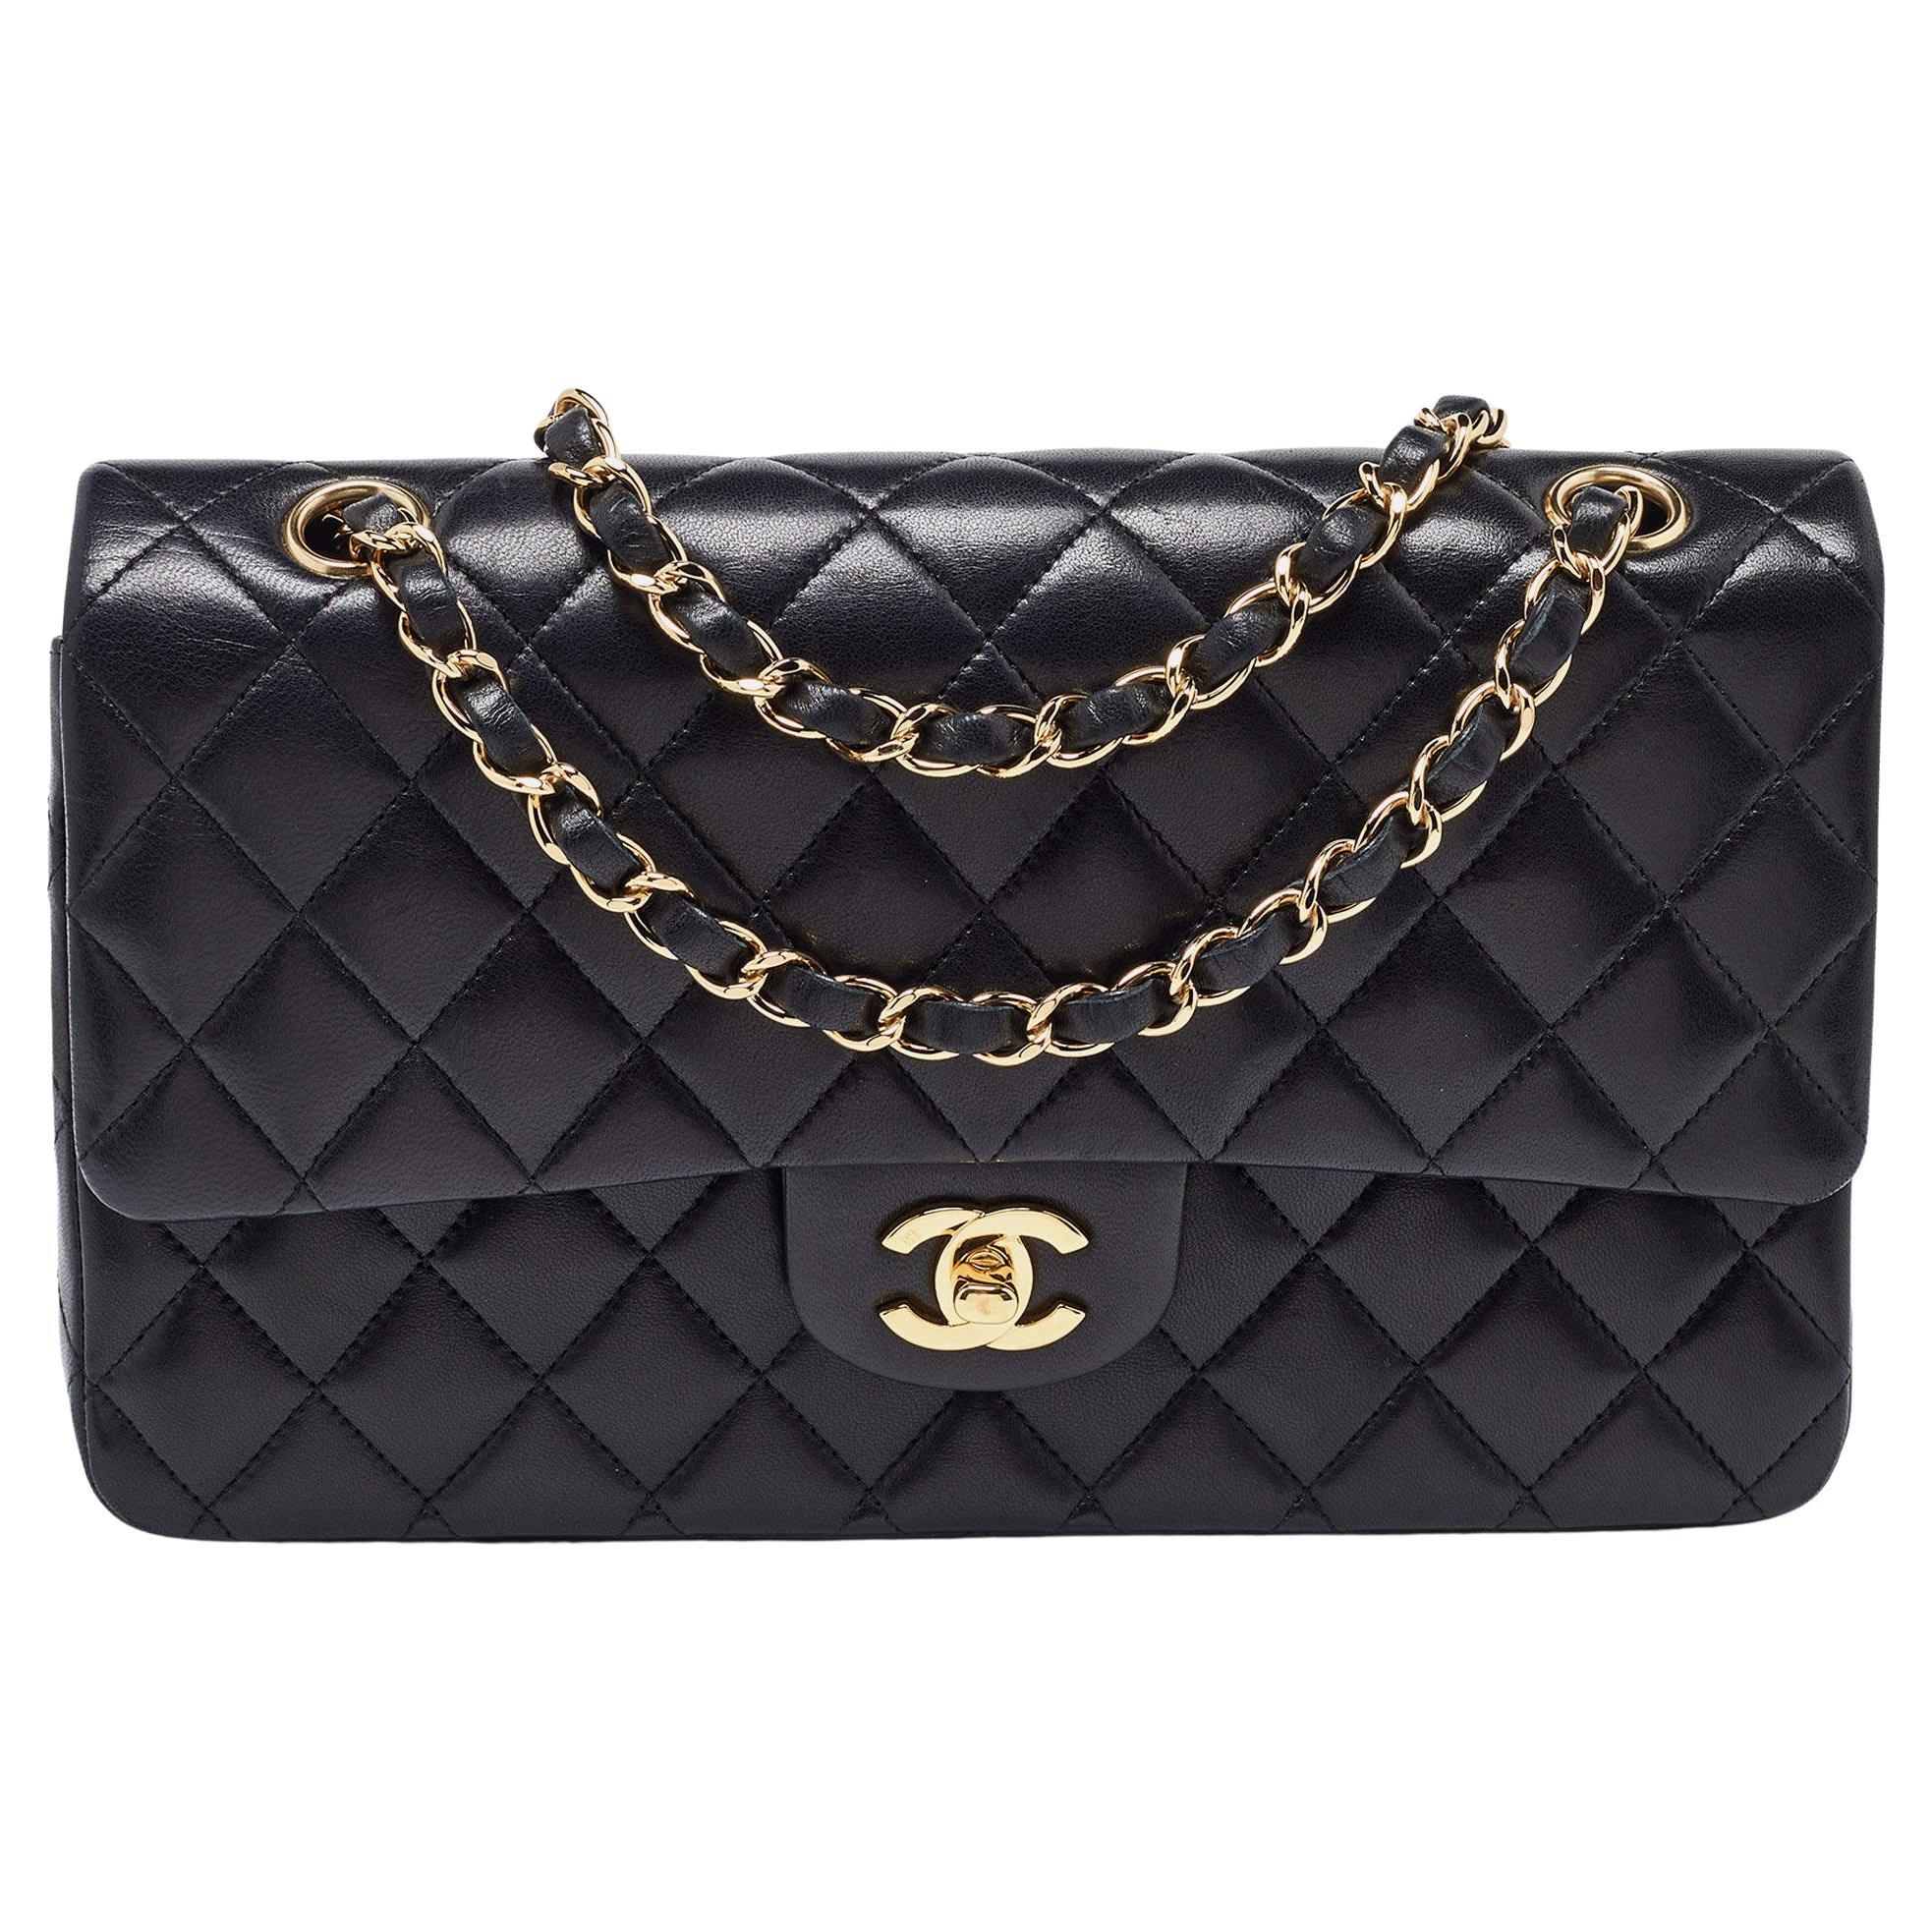 Chanel Black Quilted Leather Medium Classic Double Flap Bag For Sale